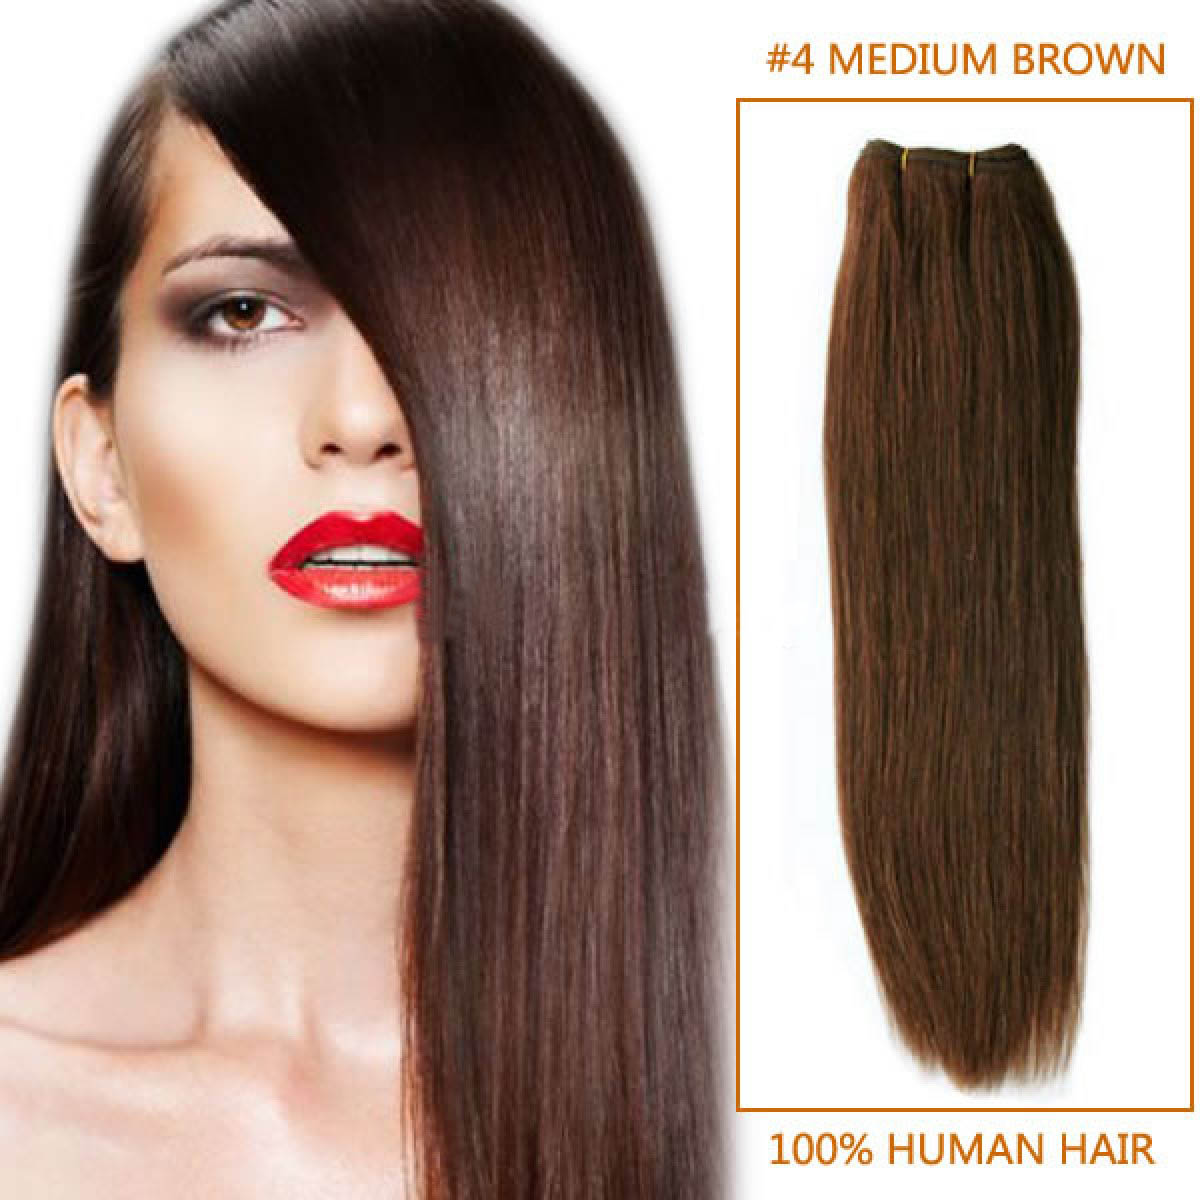 Inch 4 Medium Brown Straight Indian Remy Hair Wefts